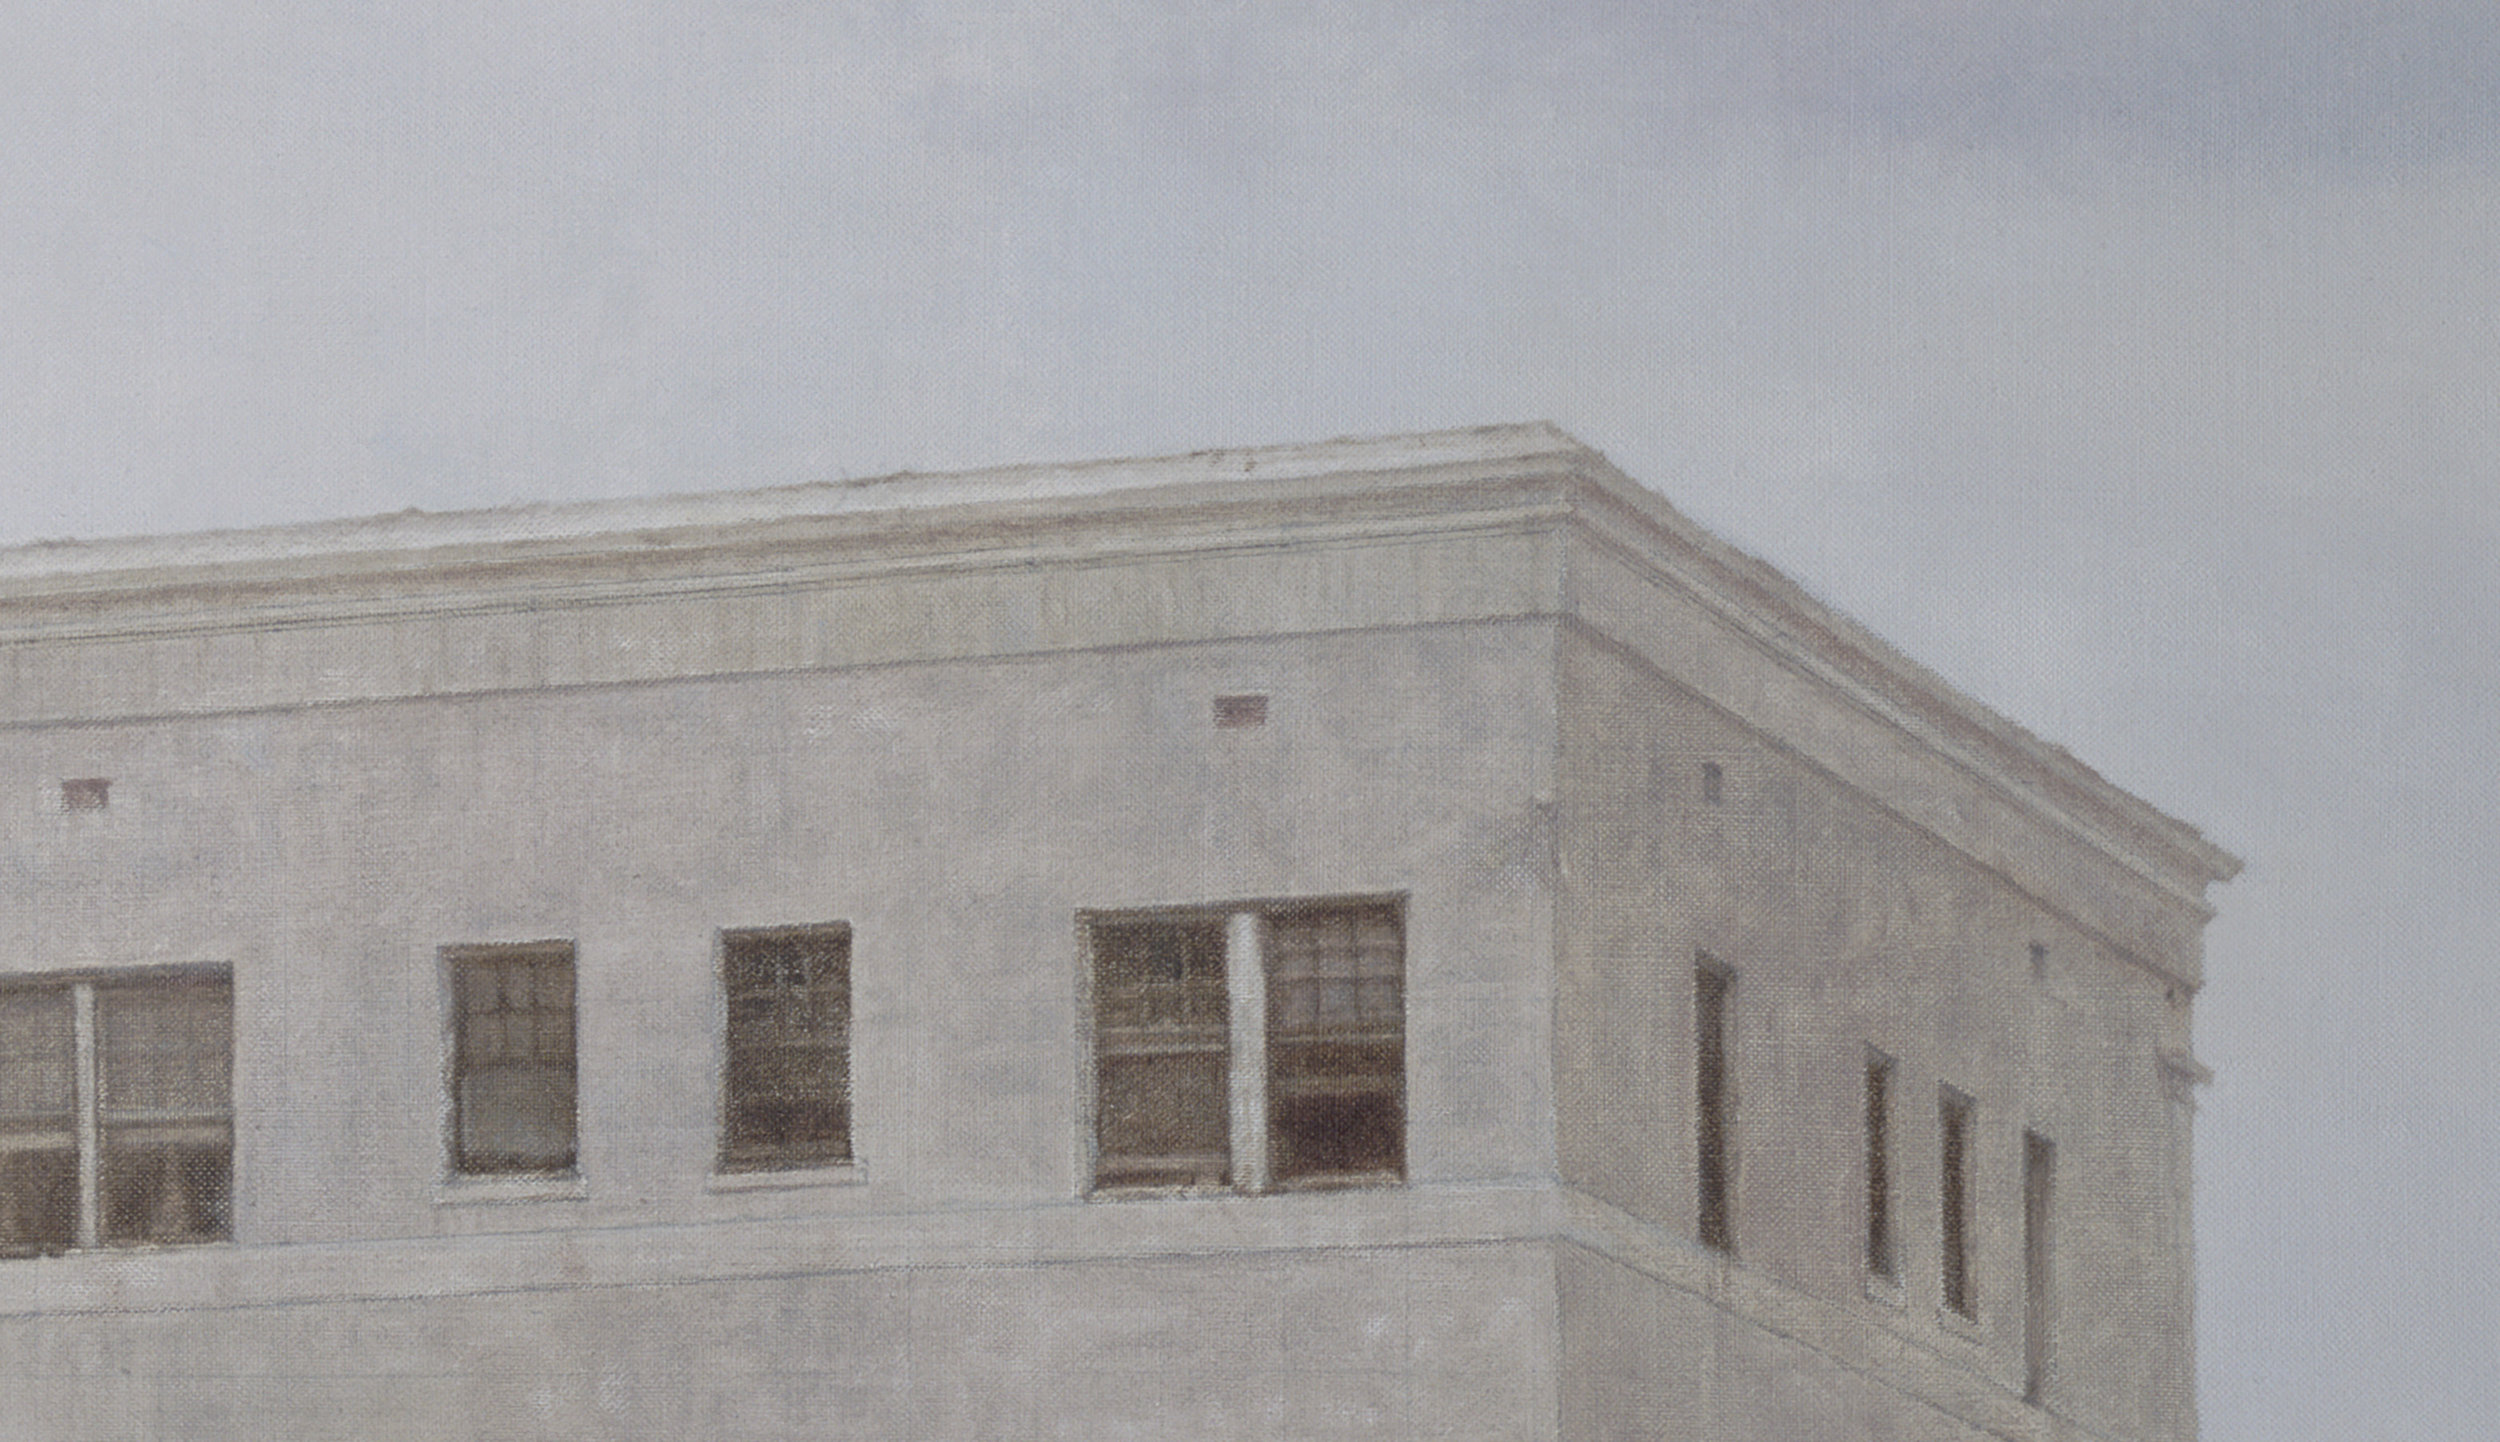   Wilshire Center Building  (Detail), 2015 Oil on linen 40 x 70 inches   